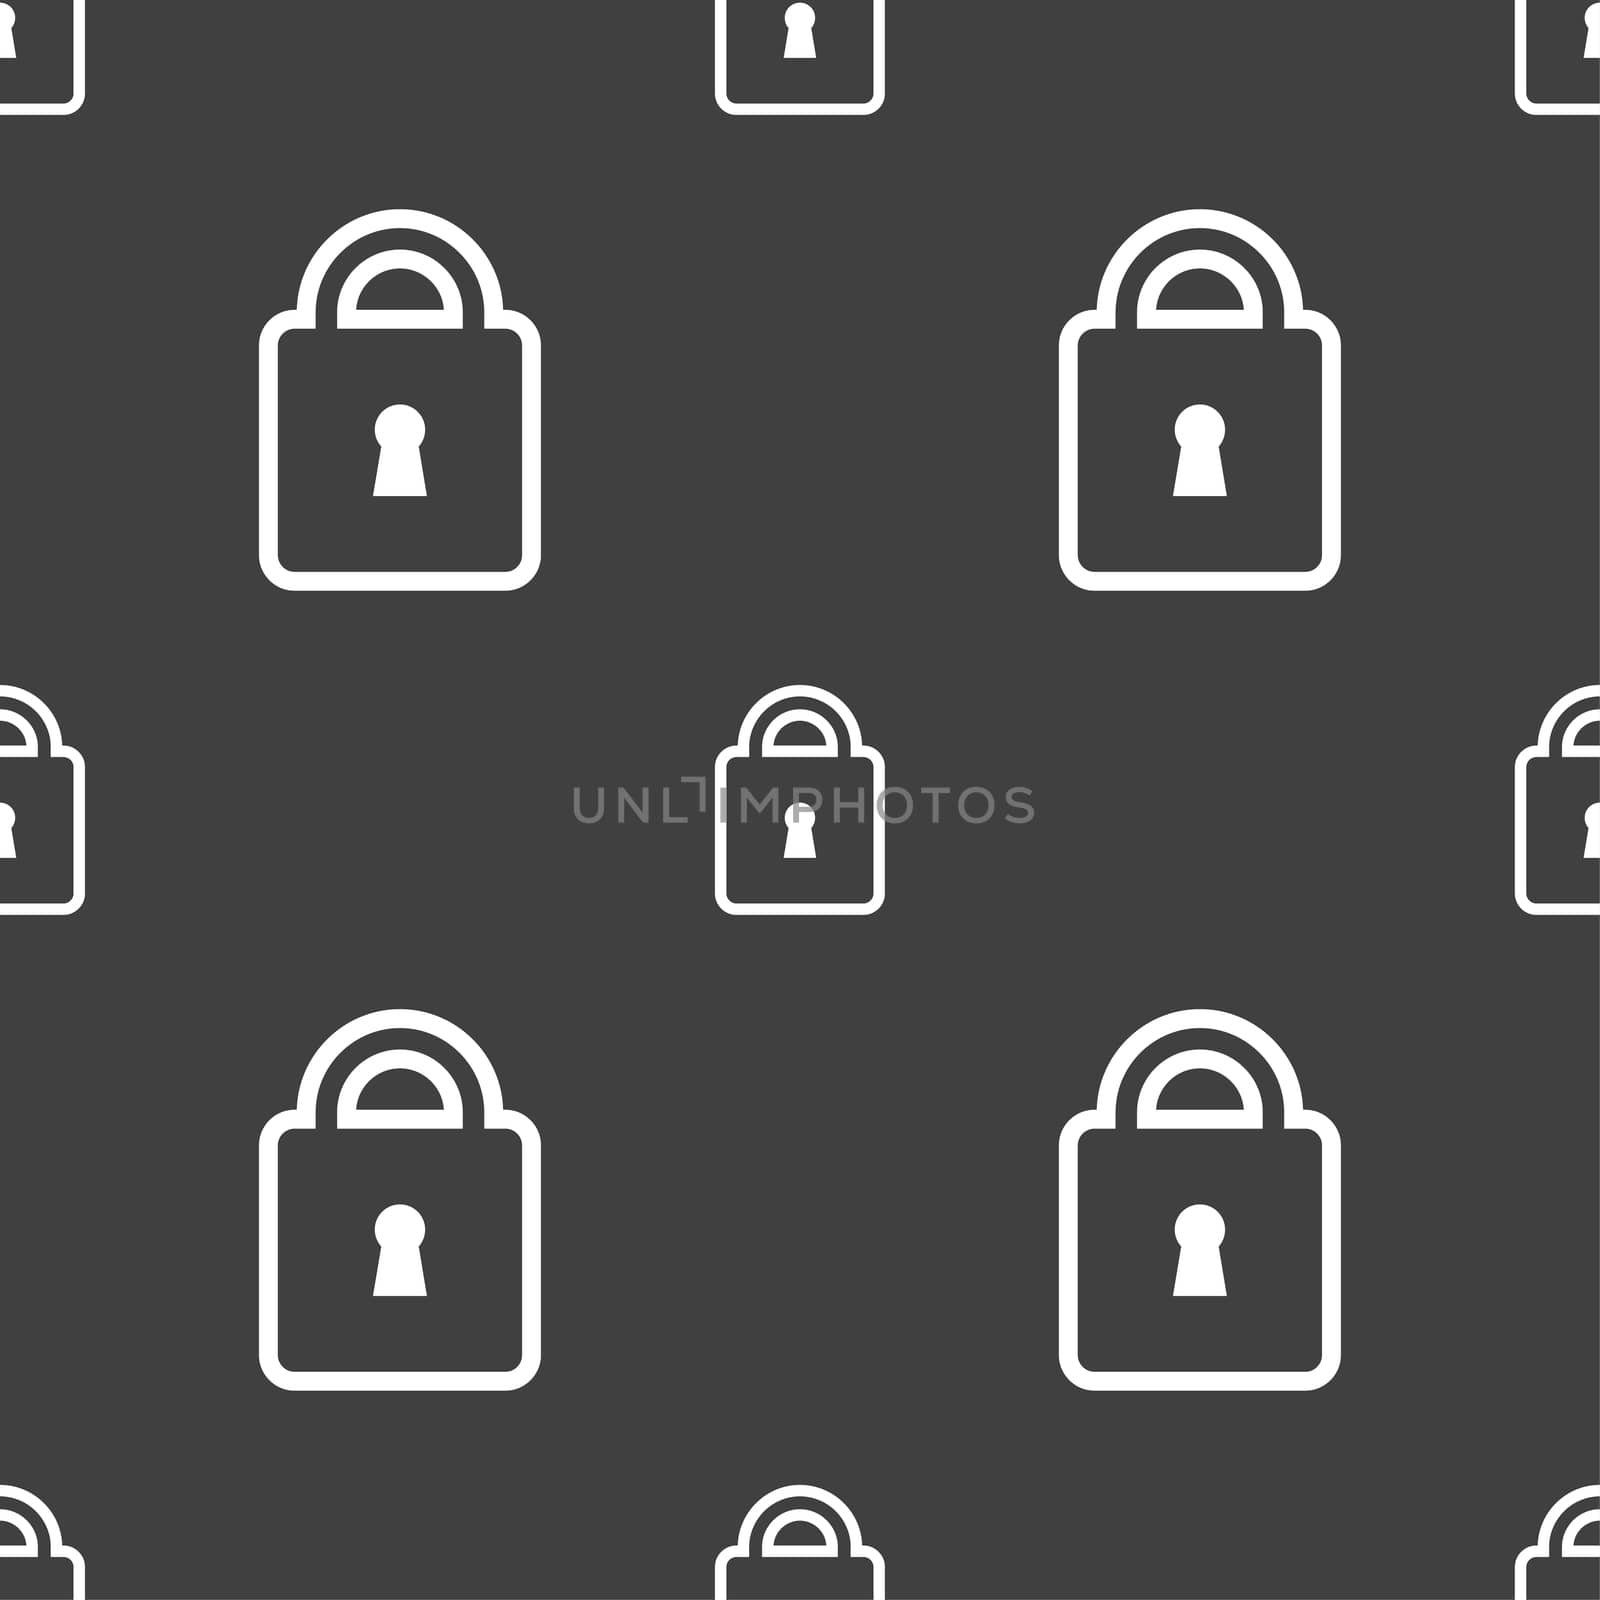 Lock icon sign. Seamless pattern on a gray background. illustration